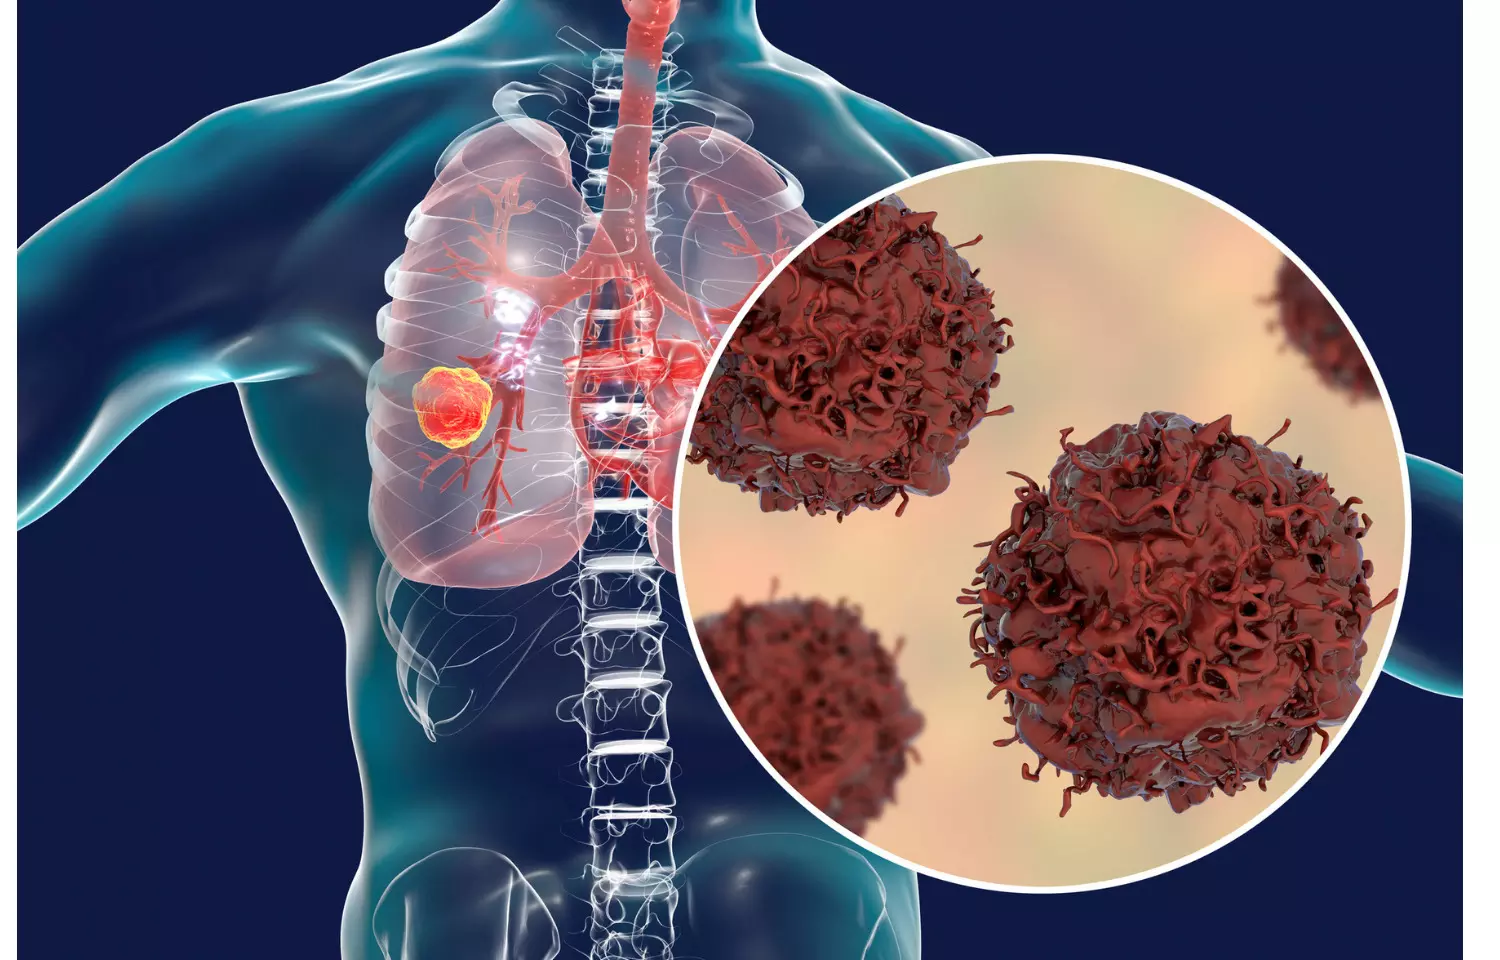 New drug combination improves survival for some with lung cancer